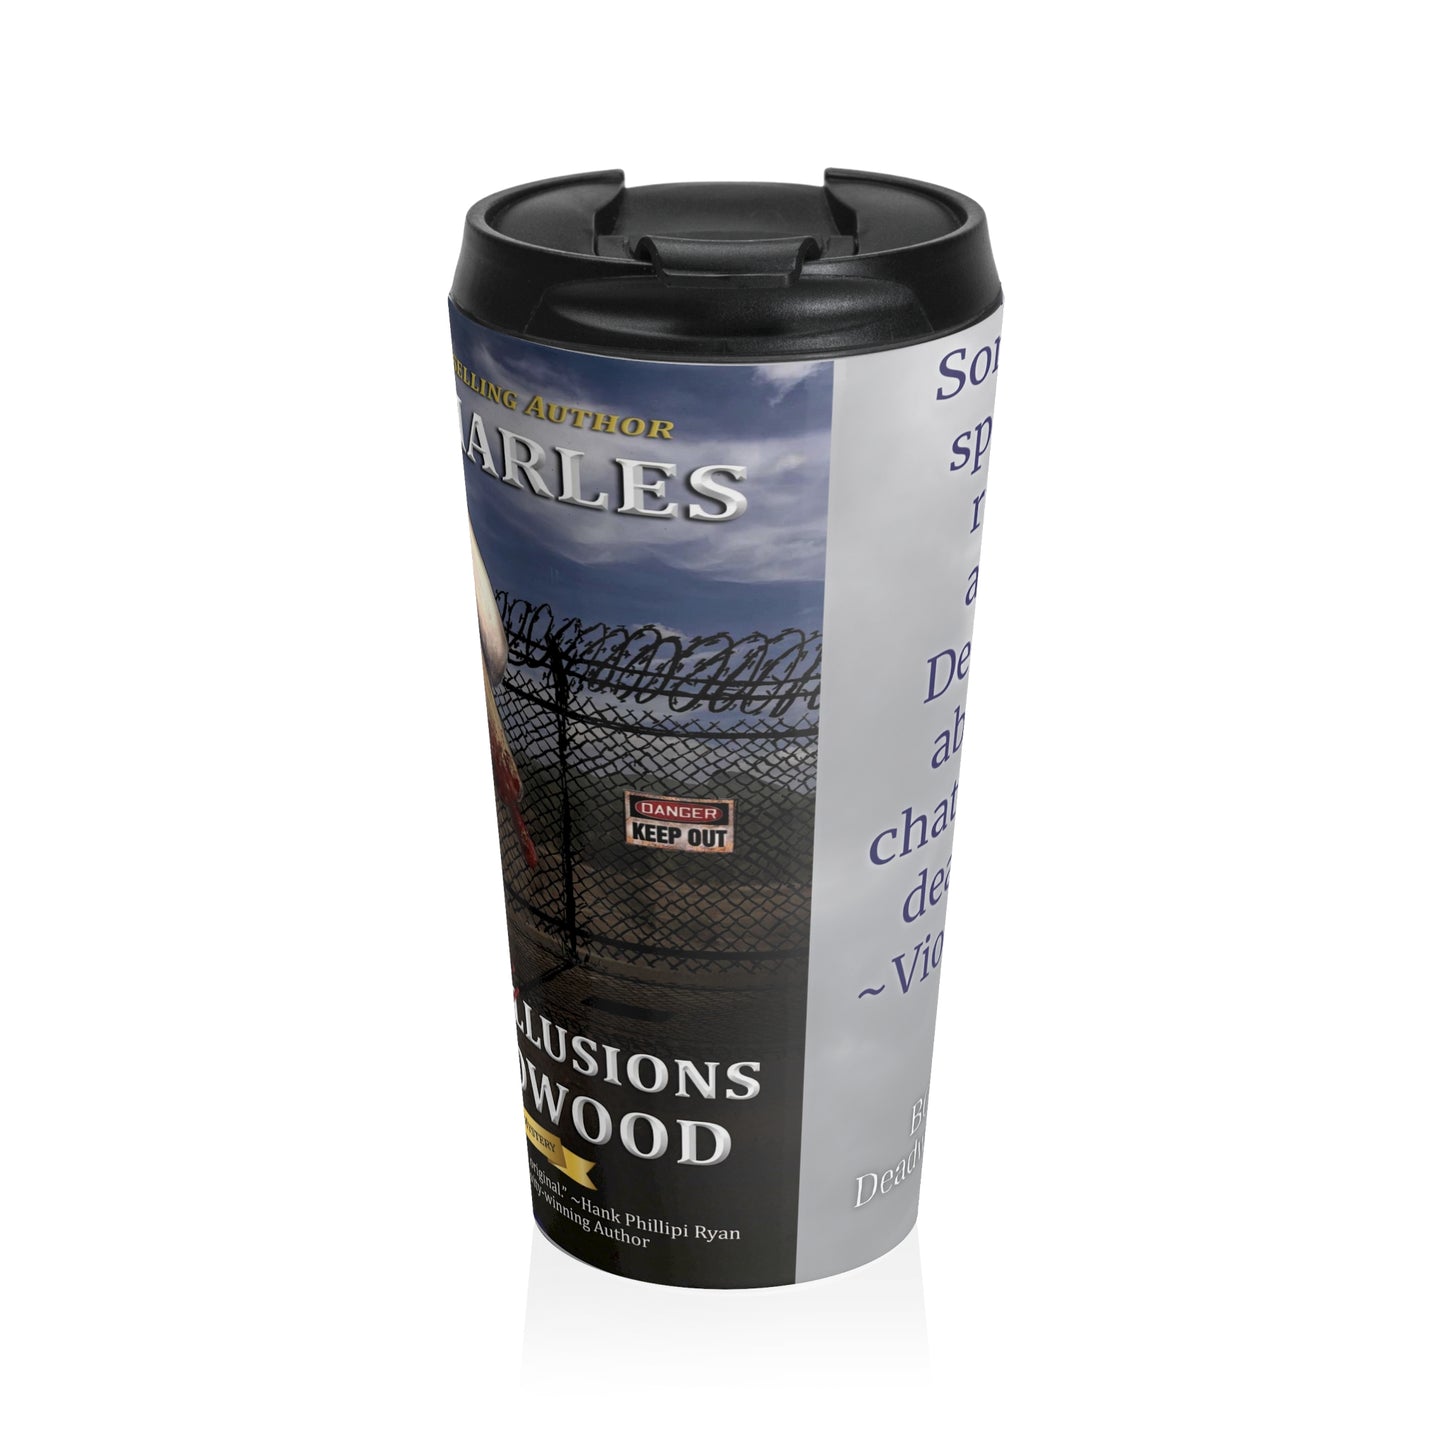 Optical Delusions In Deadwood - Stainless Steel Travel Mug